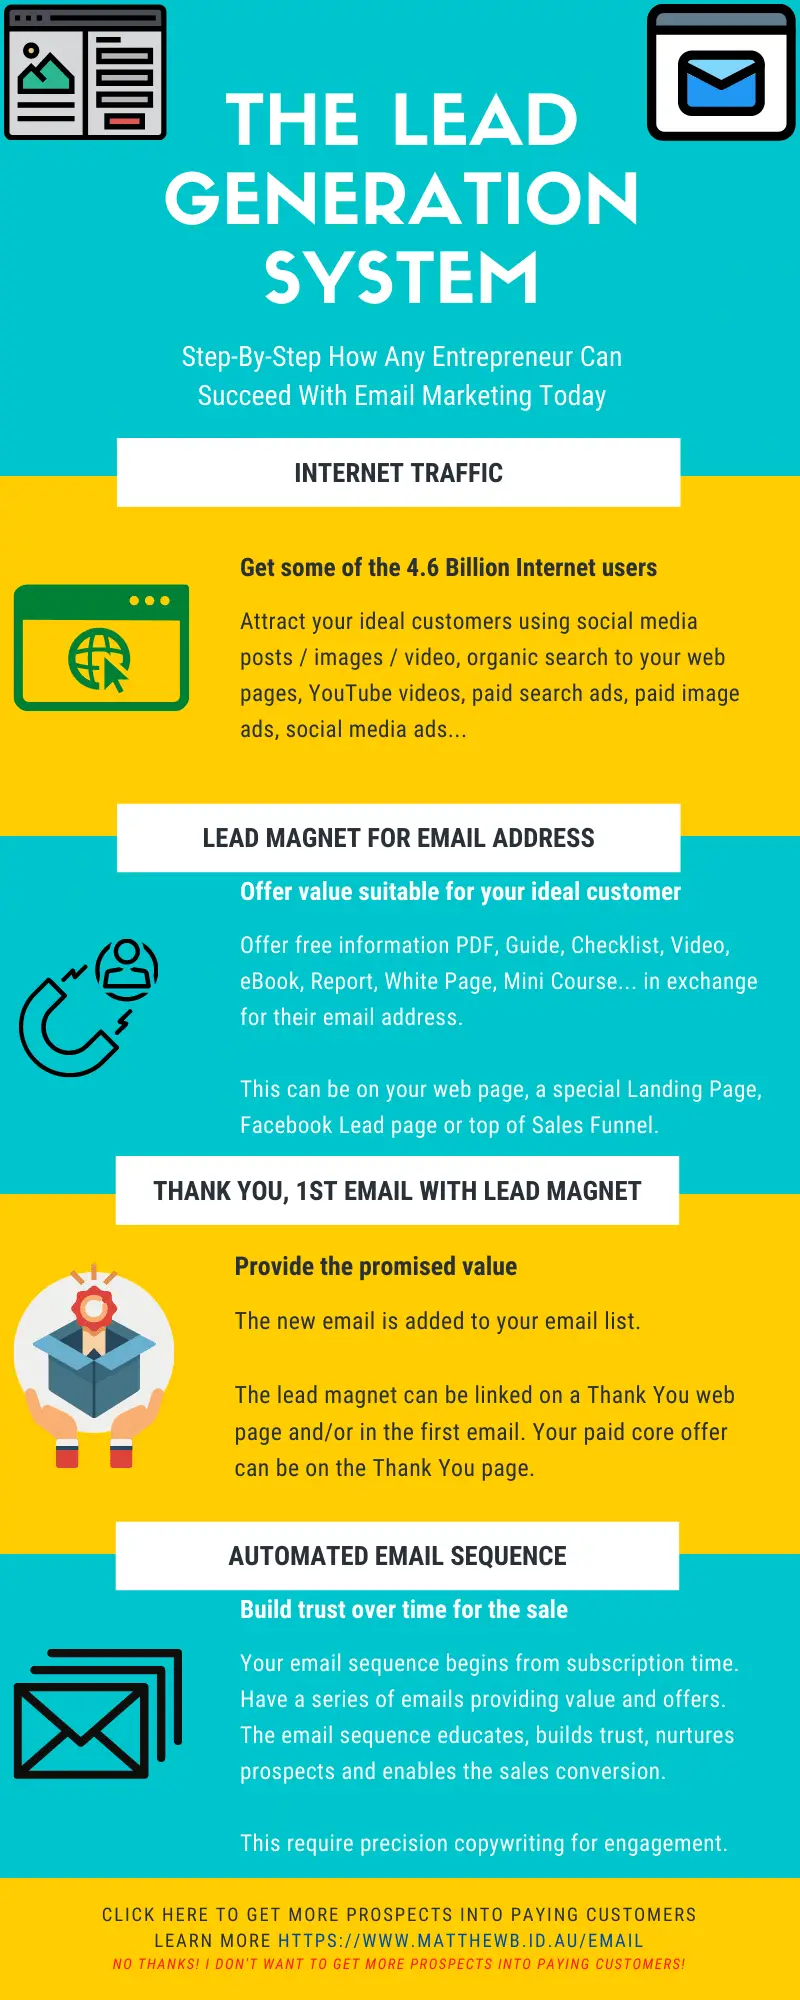 What Every Entrepreneur Needs To Know About Lead Generation and Email Marketing - Infographic